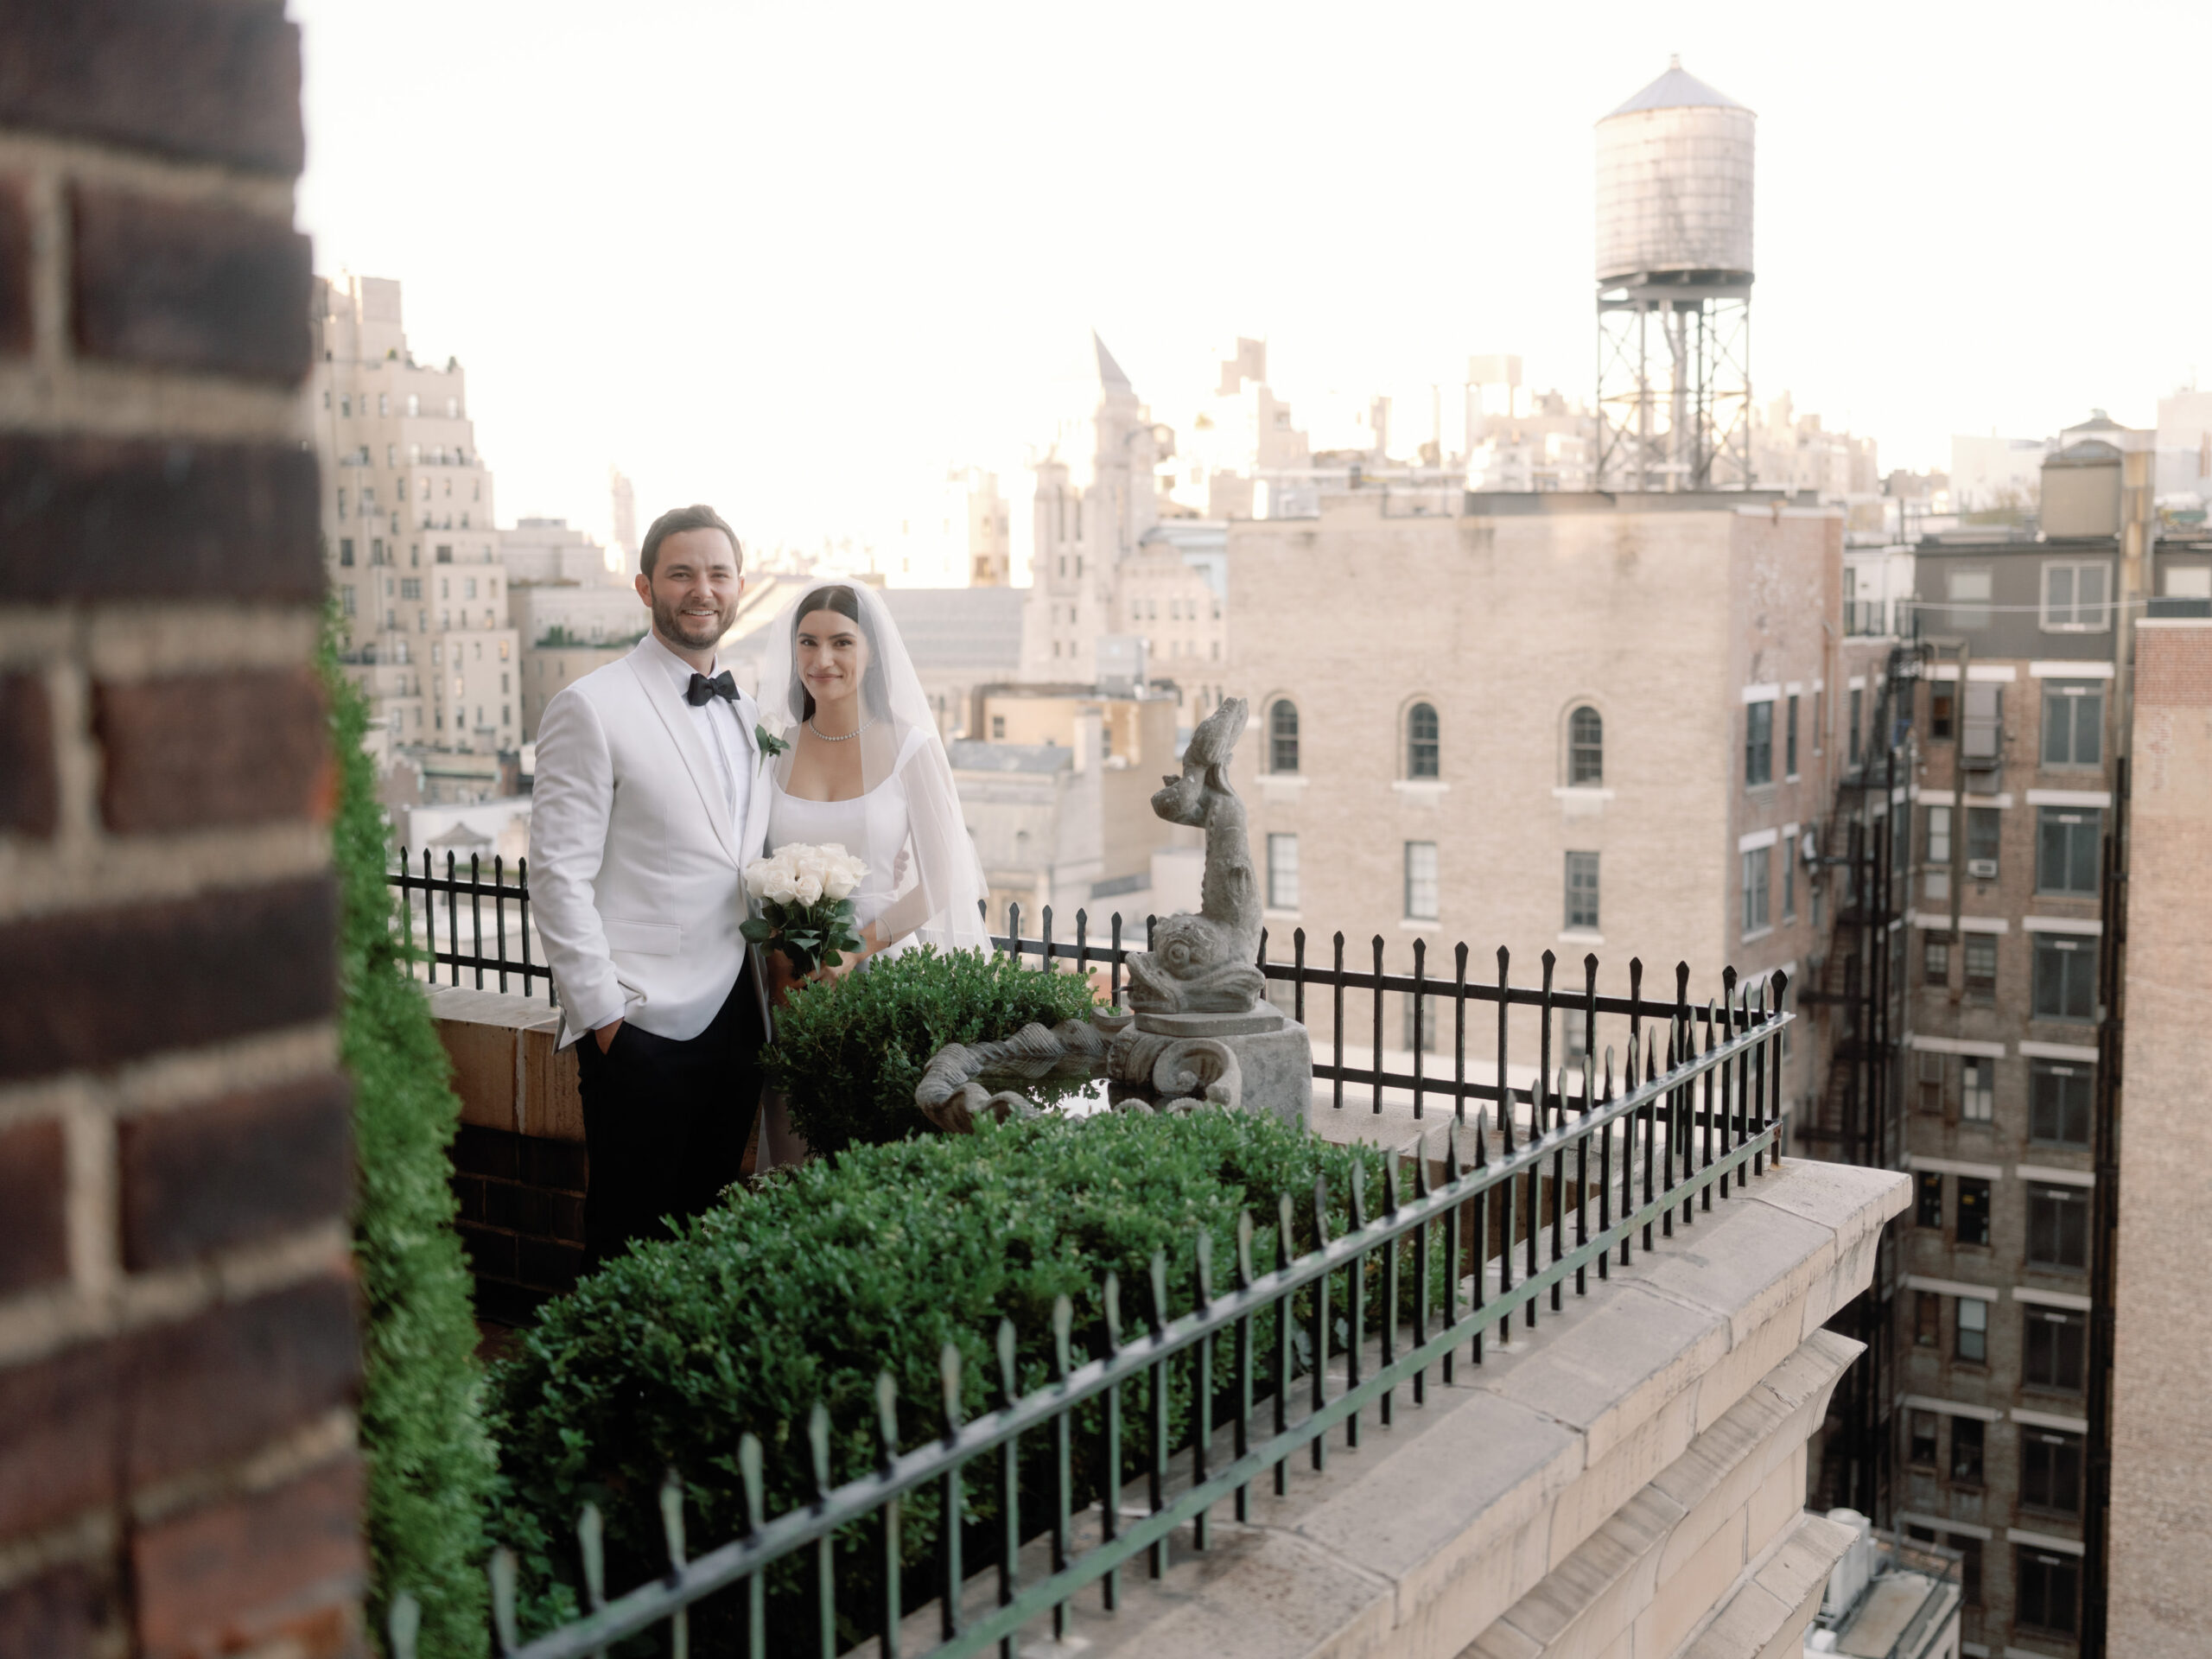 The newlyweds are standing in a veranda, with NYC buildings in the background. Image by Jenny Fu Studio